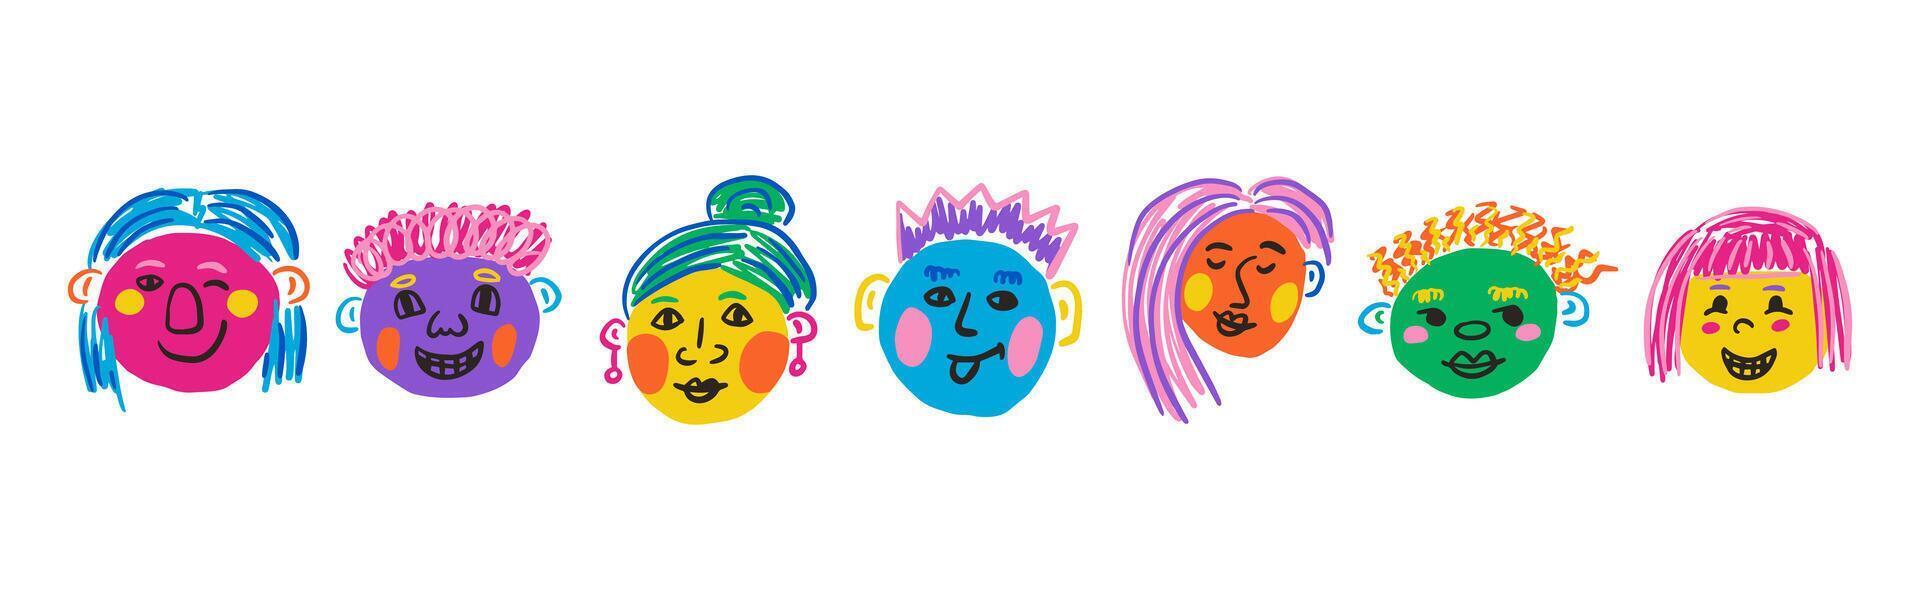 Colorful people face set. Funny portraits, modern abstract character in doodle style. hand drawn illustration vector